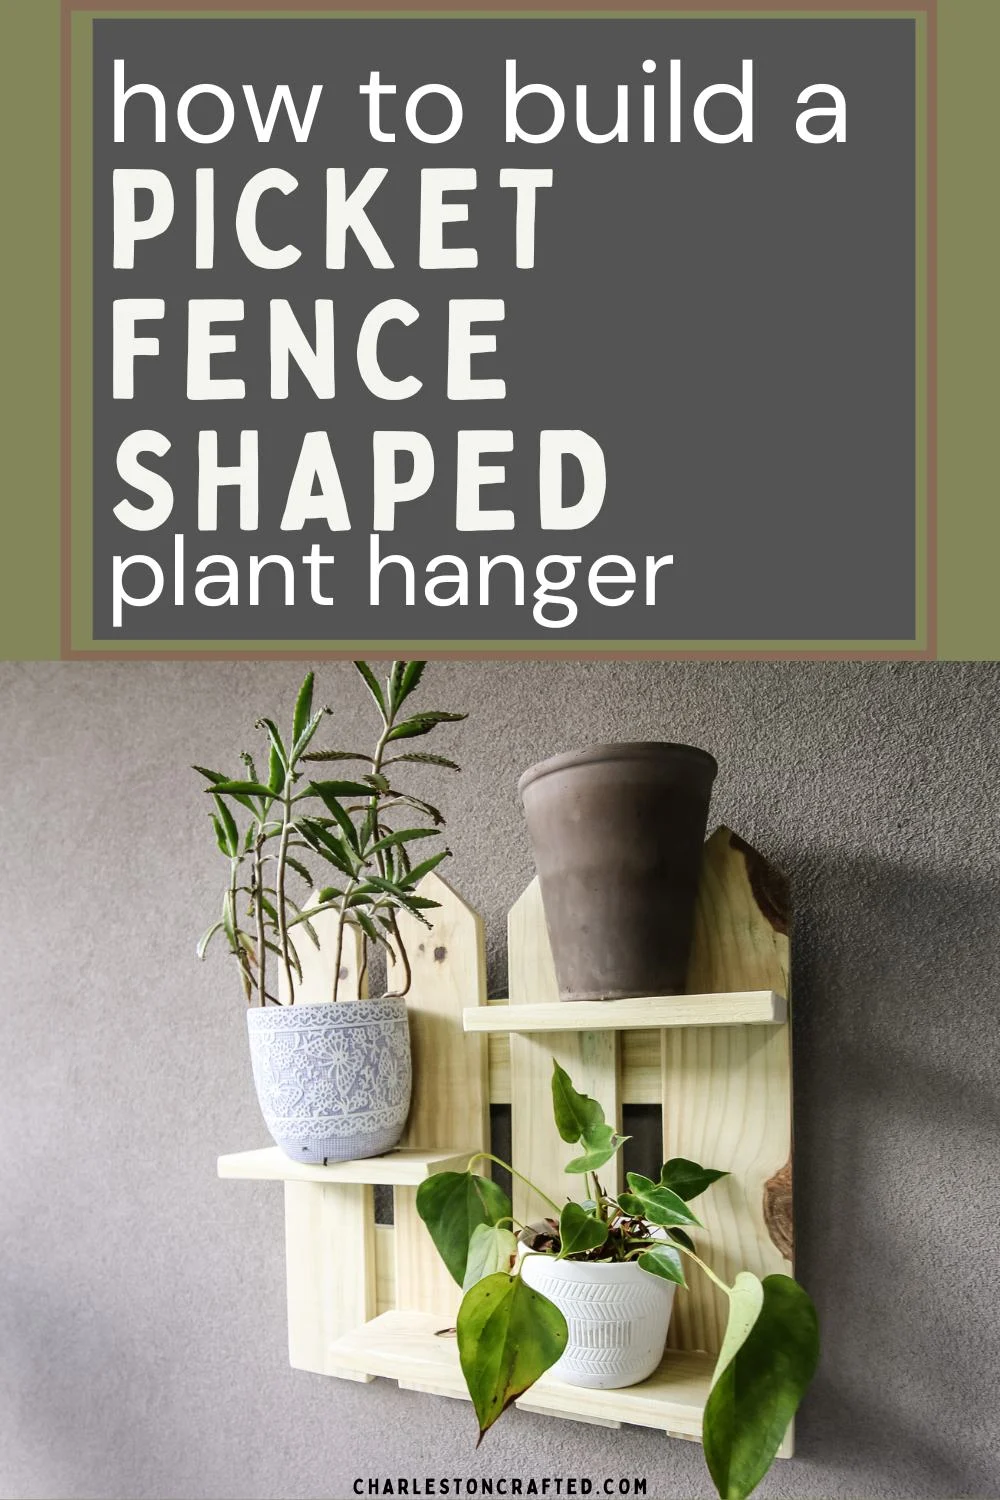 Picket fence shaped plant hanger - Charleston Crafted